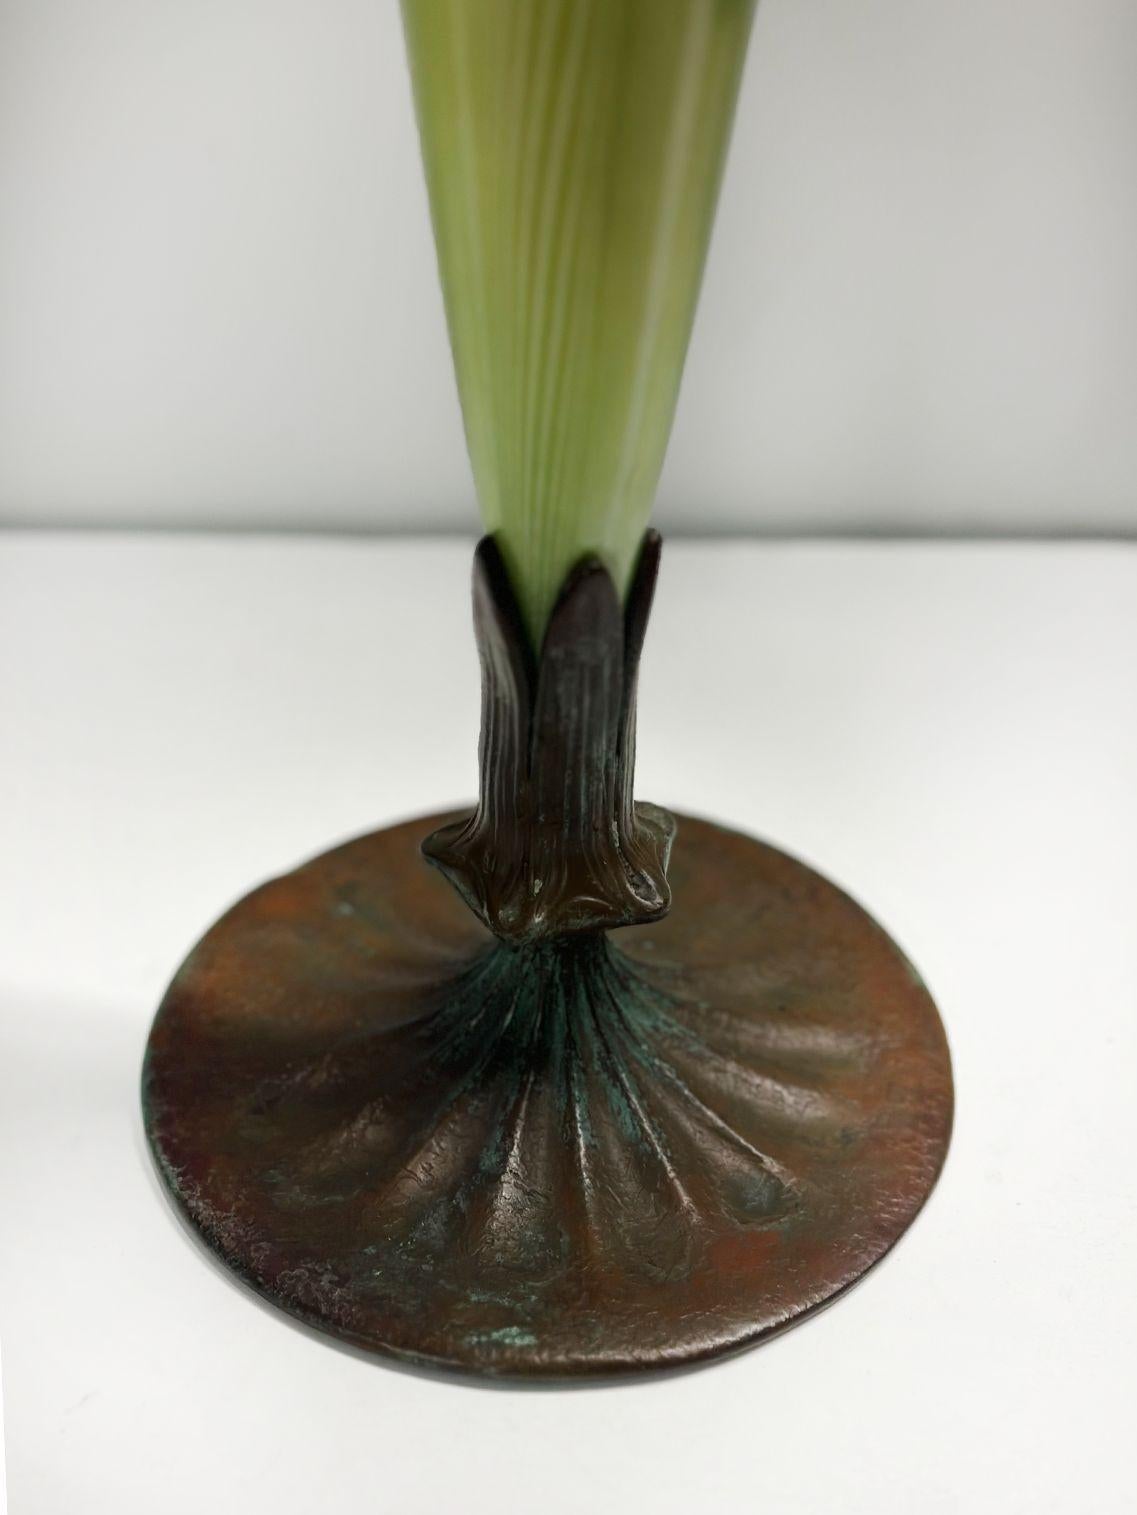 Vintage L.C. Tiffany Studios Feathered Favrile Glass Vase, c. 1980's In Good Condition For Sale In Los Angeles, CA